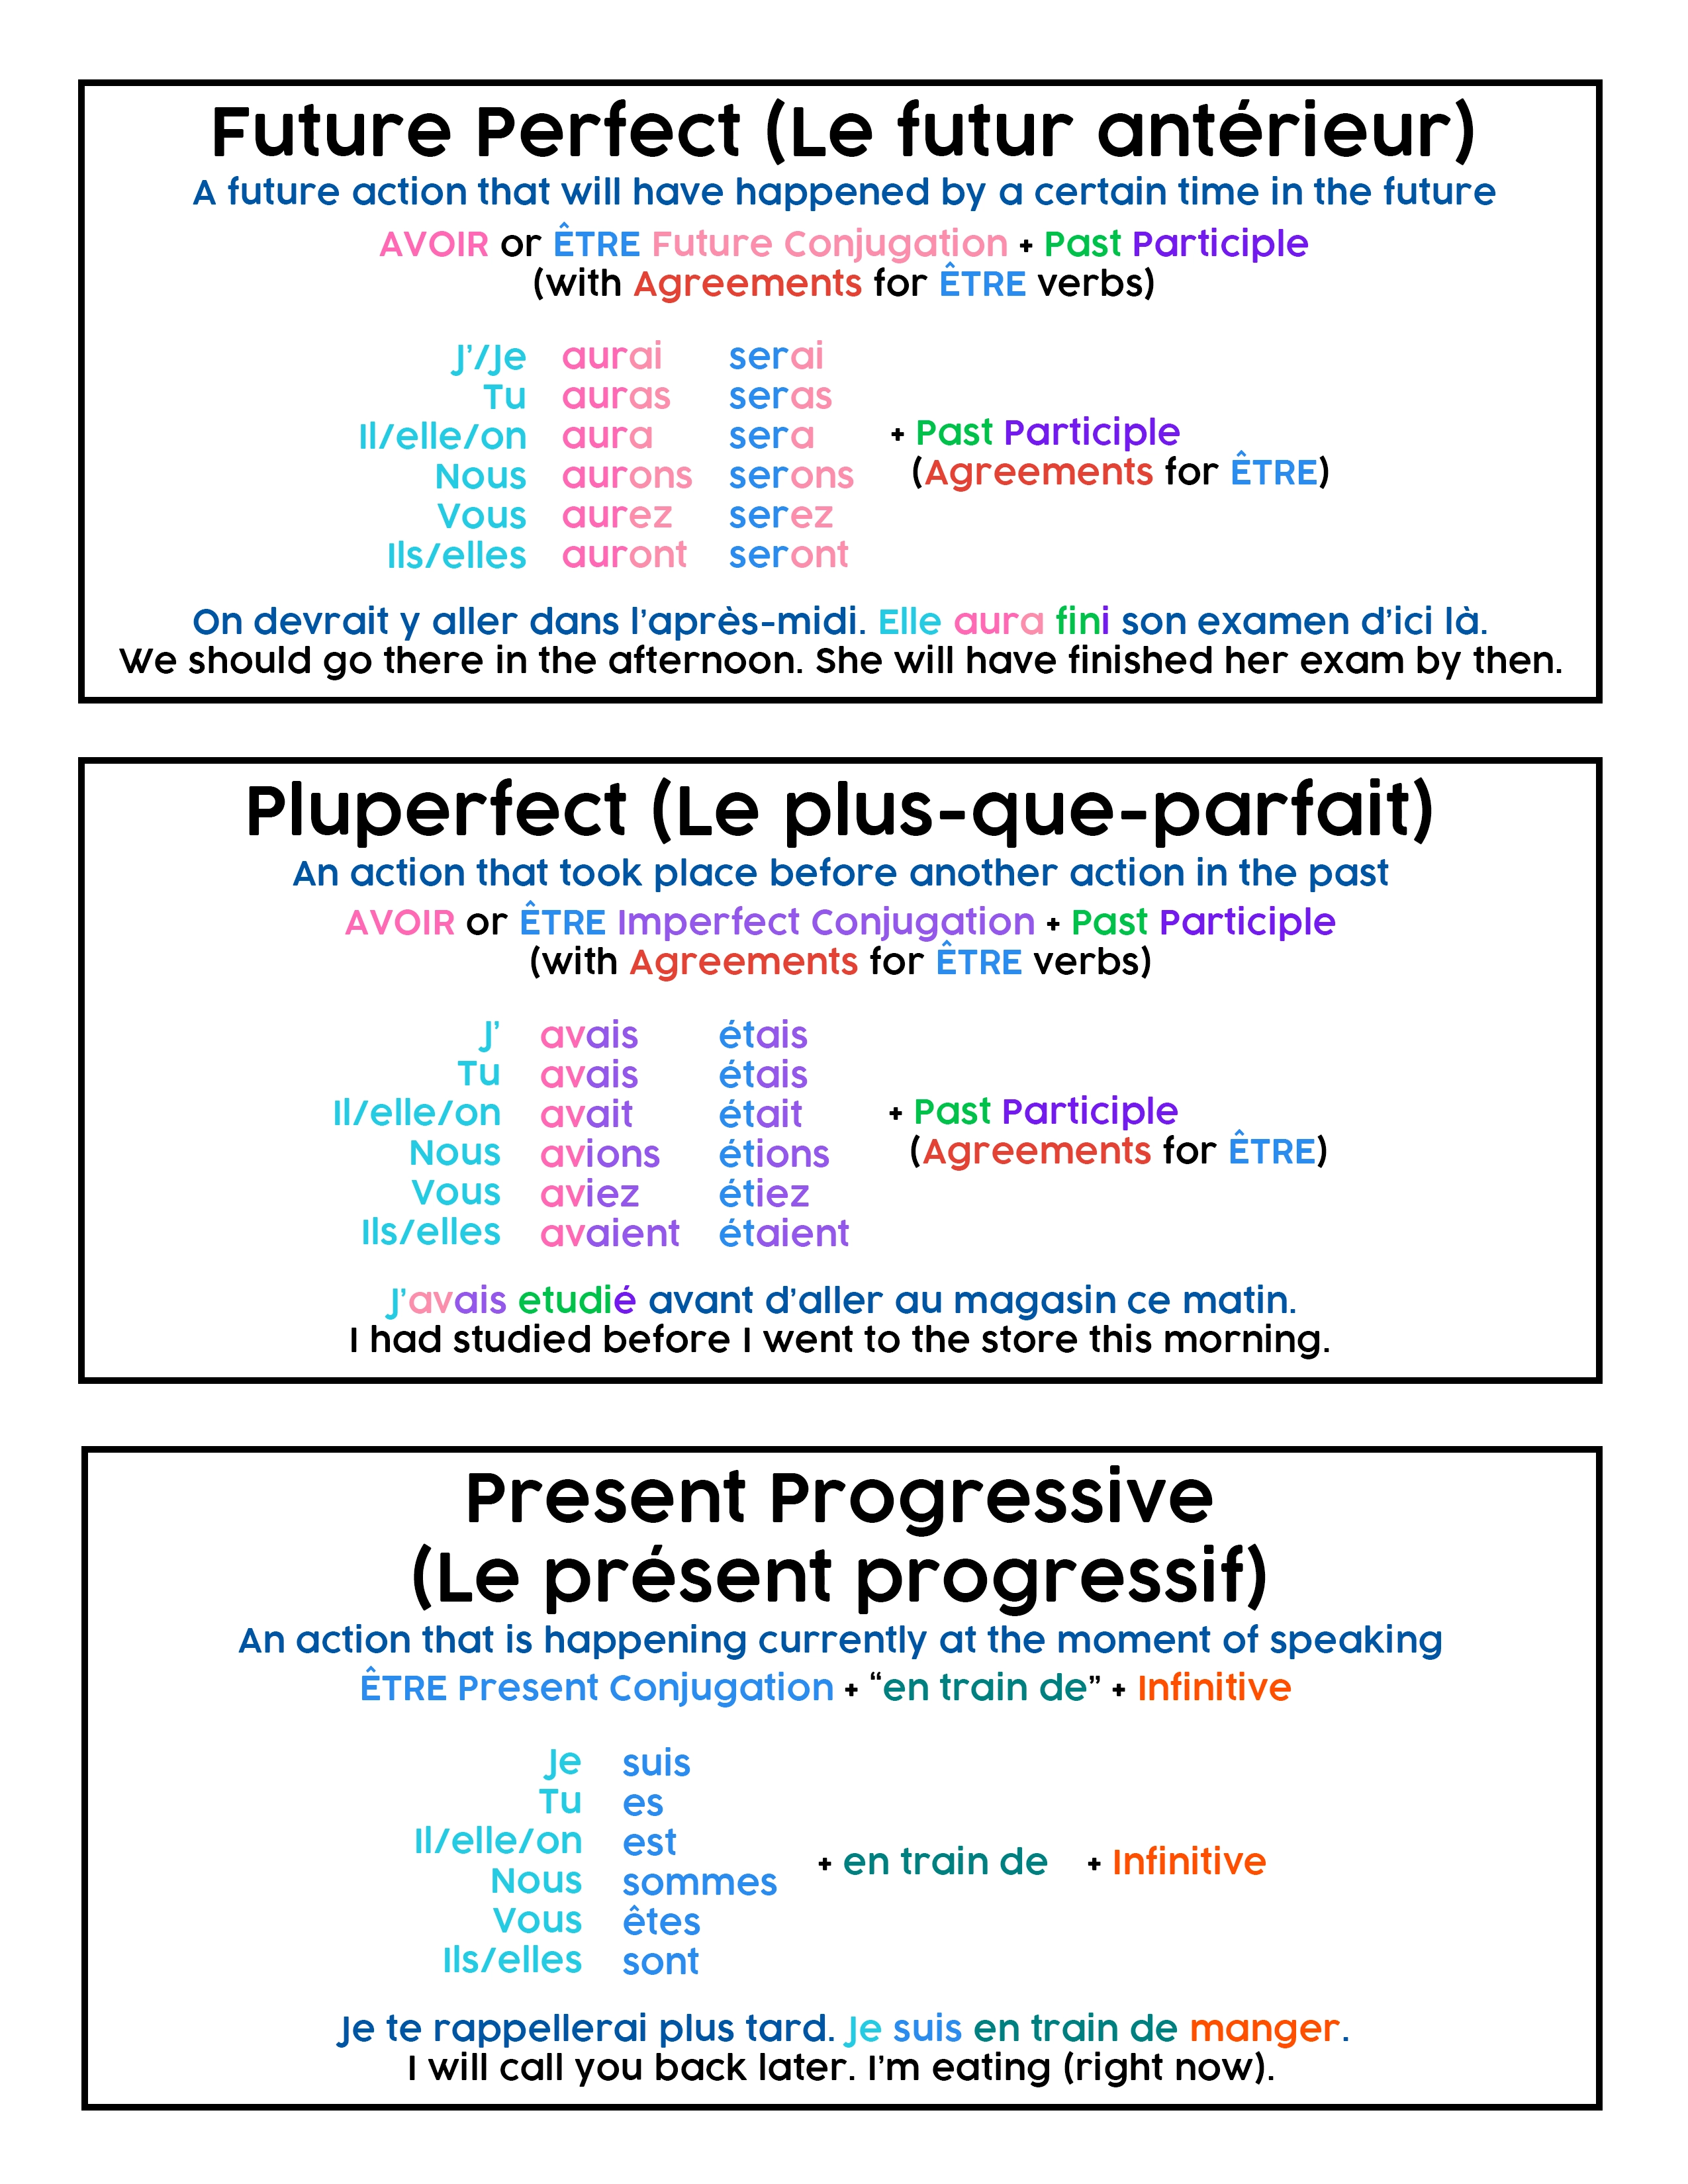 1672-french---future-perfect-pluperfect-present-pro-complete-17108260786872.png